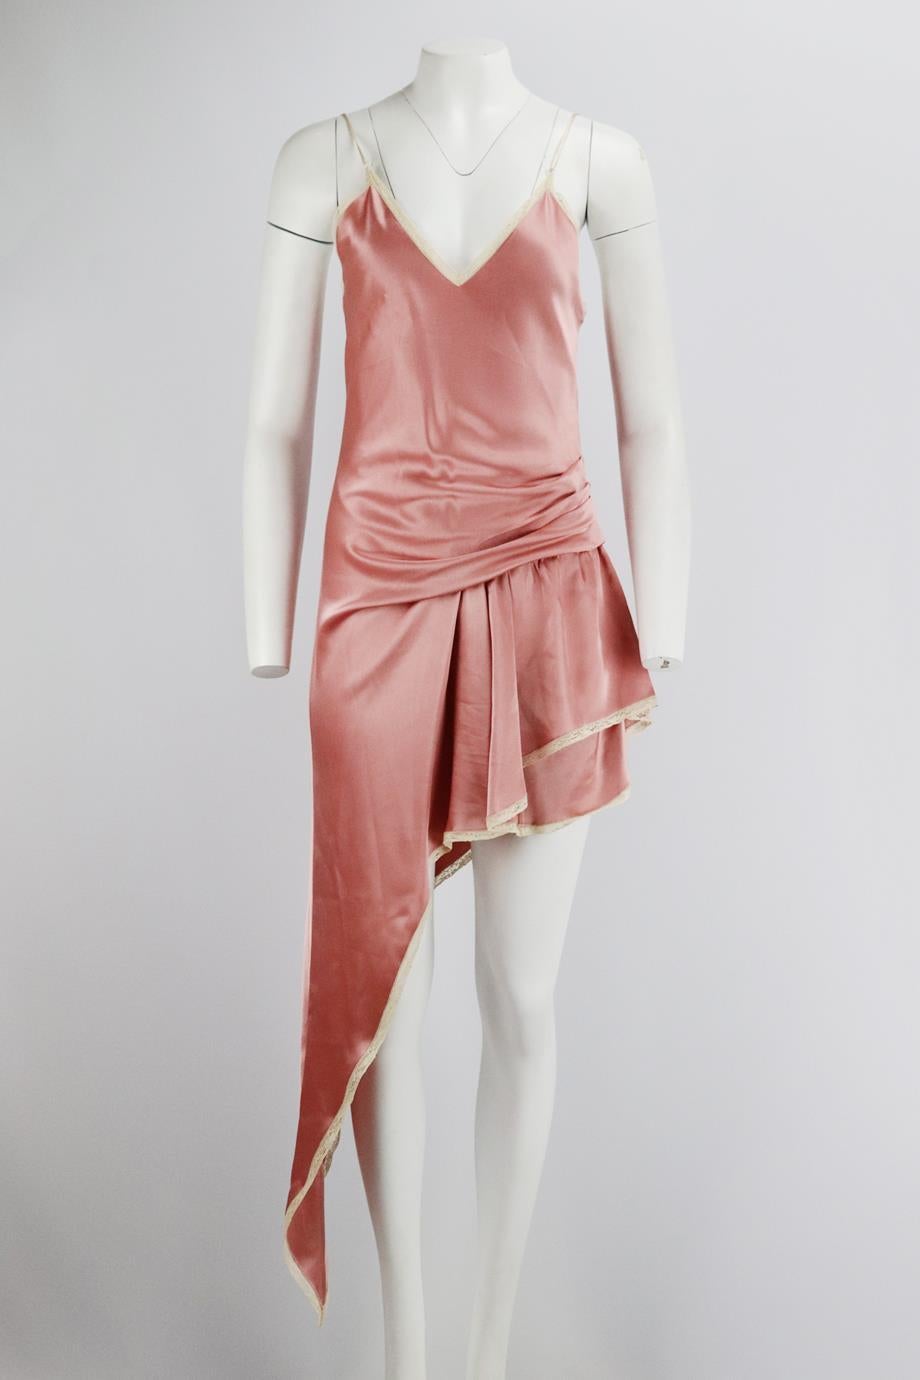 Alexander Wang asymmetric lace trimmed satin playsuit. Pink. Sleeveless, v-neck. Concealed zip fastening at back. 80% Triacetate, 20% polyester; combo: 100% silk; lining: 100% polyamide; trim: 90% cotton, 10% nylon. Size: US 2 (UK 6, FR 34, IT 38).